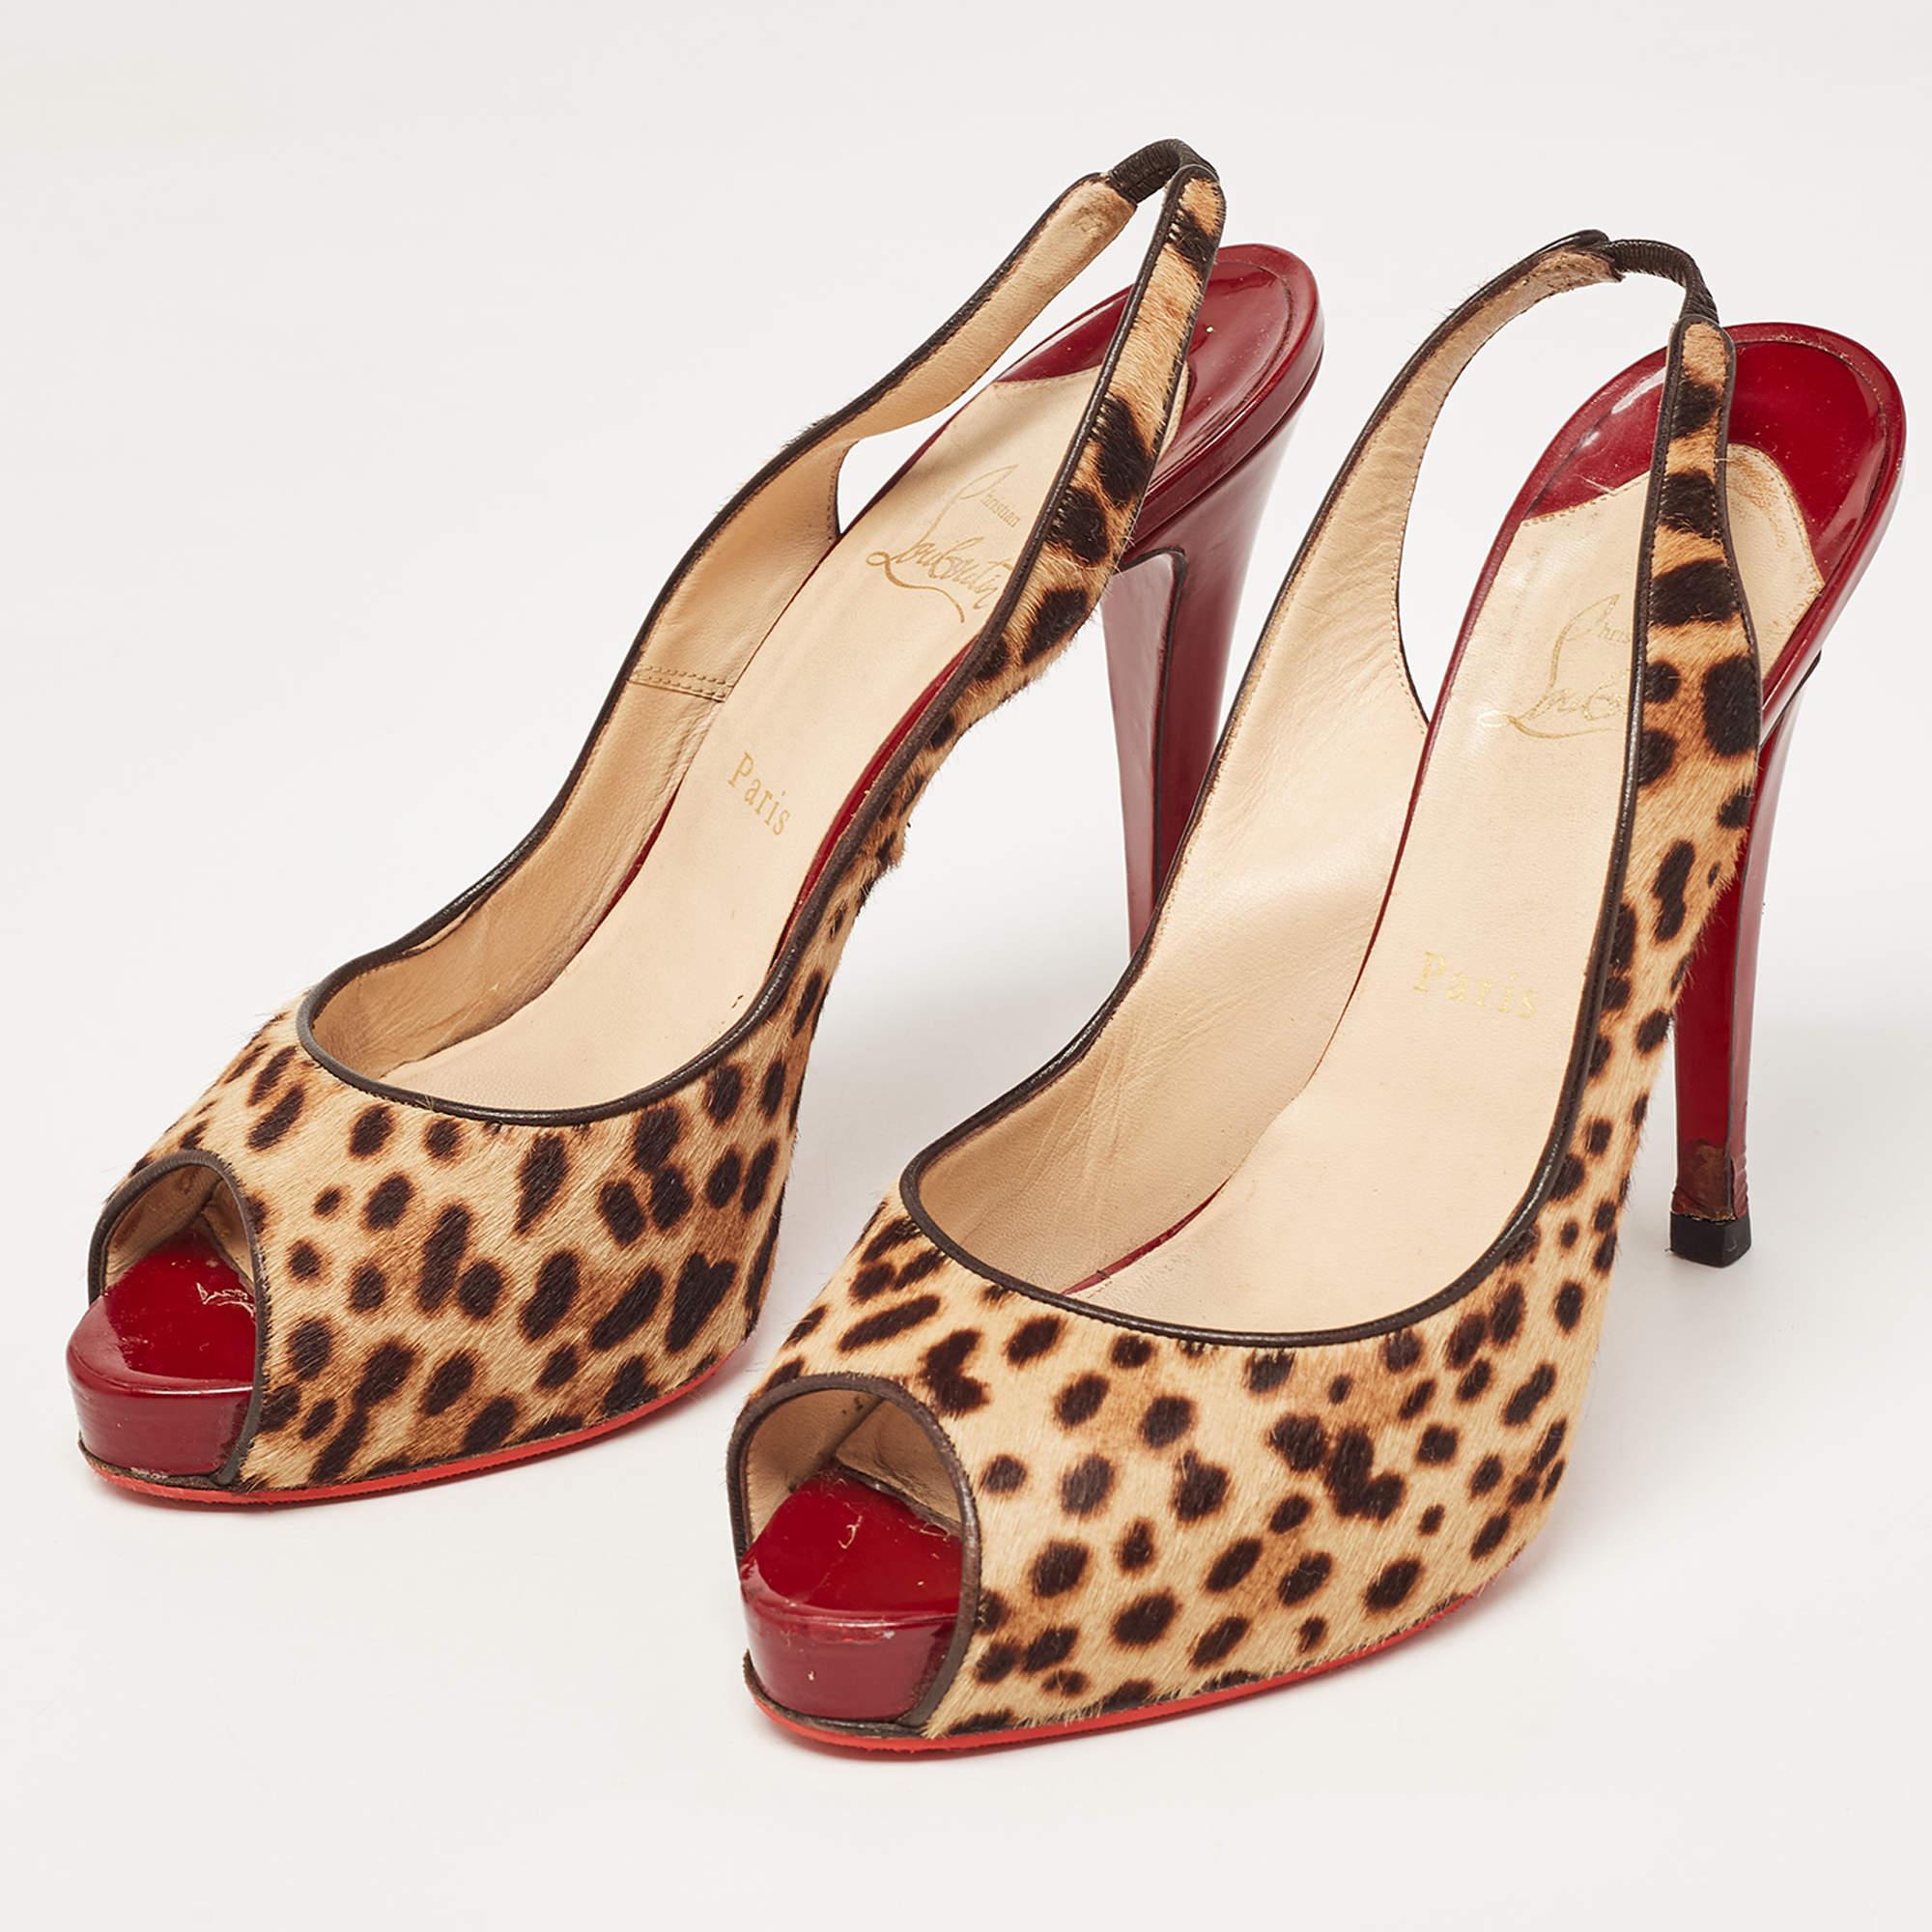 Christian Louboutin Beige/Brown Calf Hair No Prive Slingback Pumps 41 For Sale 4